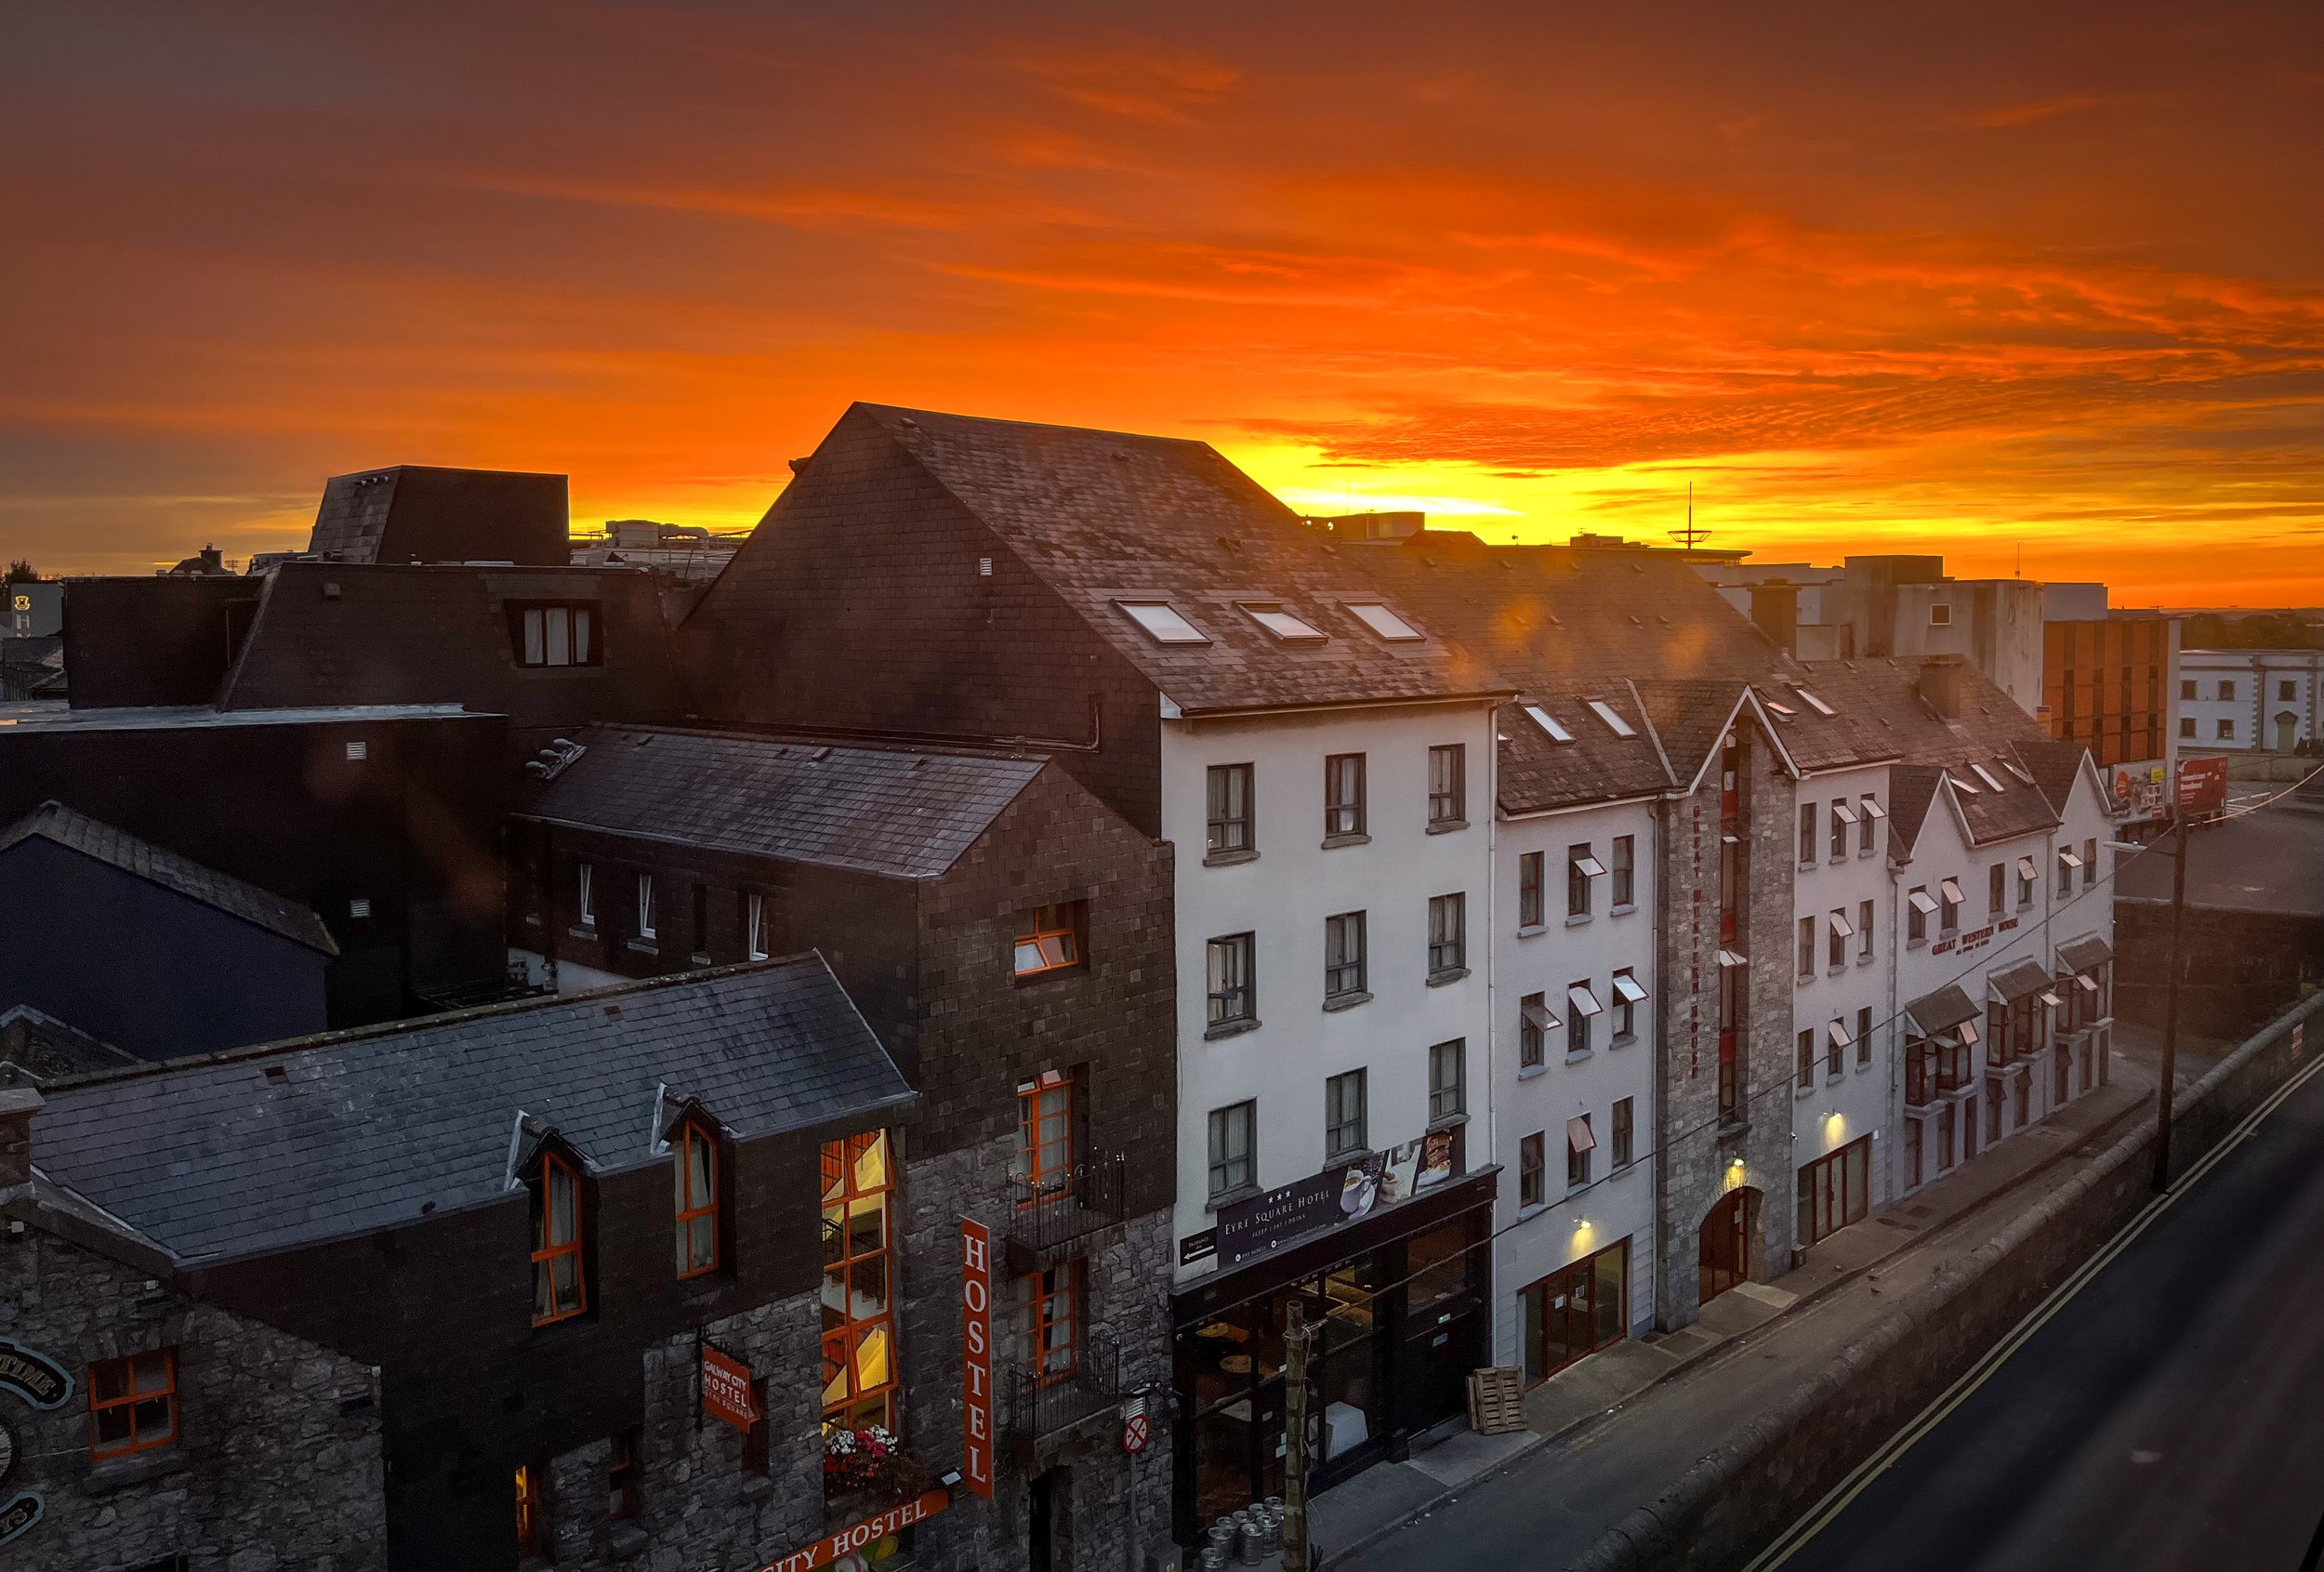 Sunrise in Galway